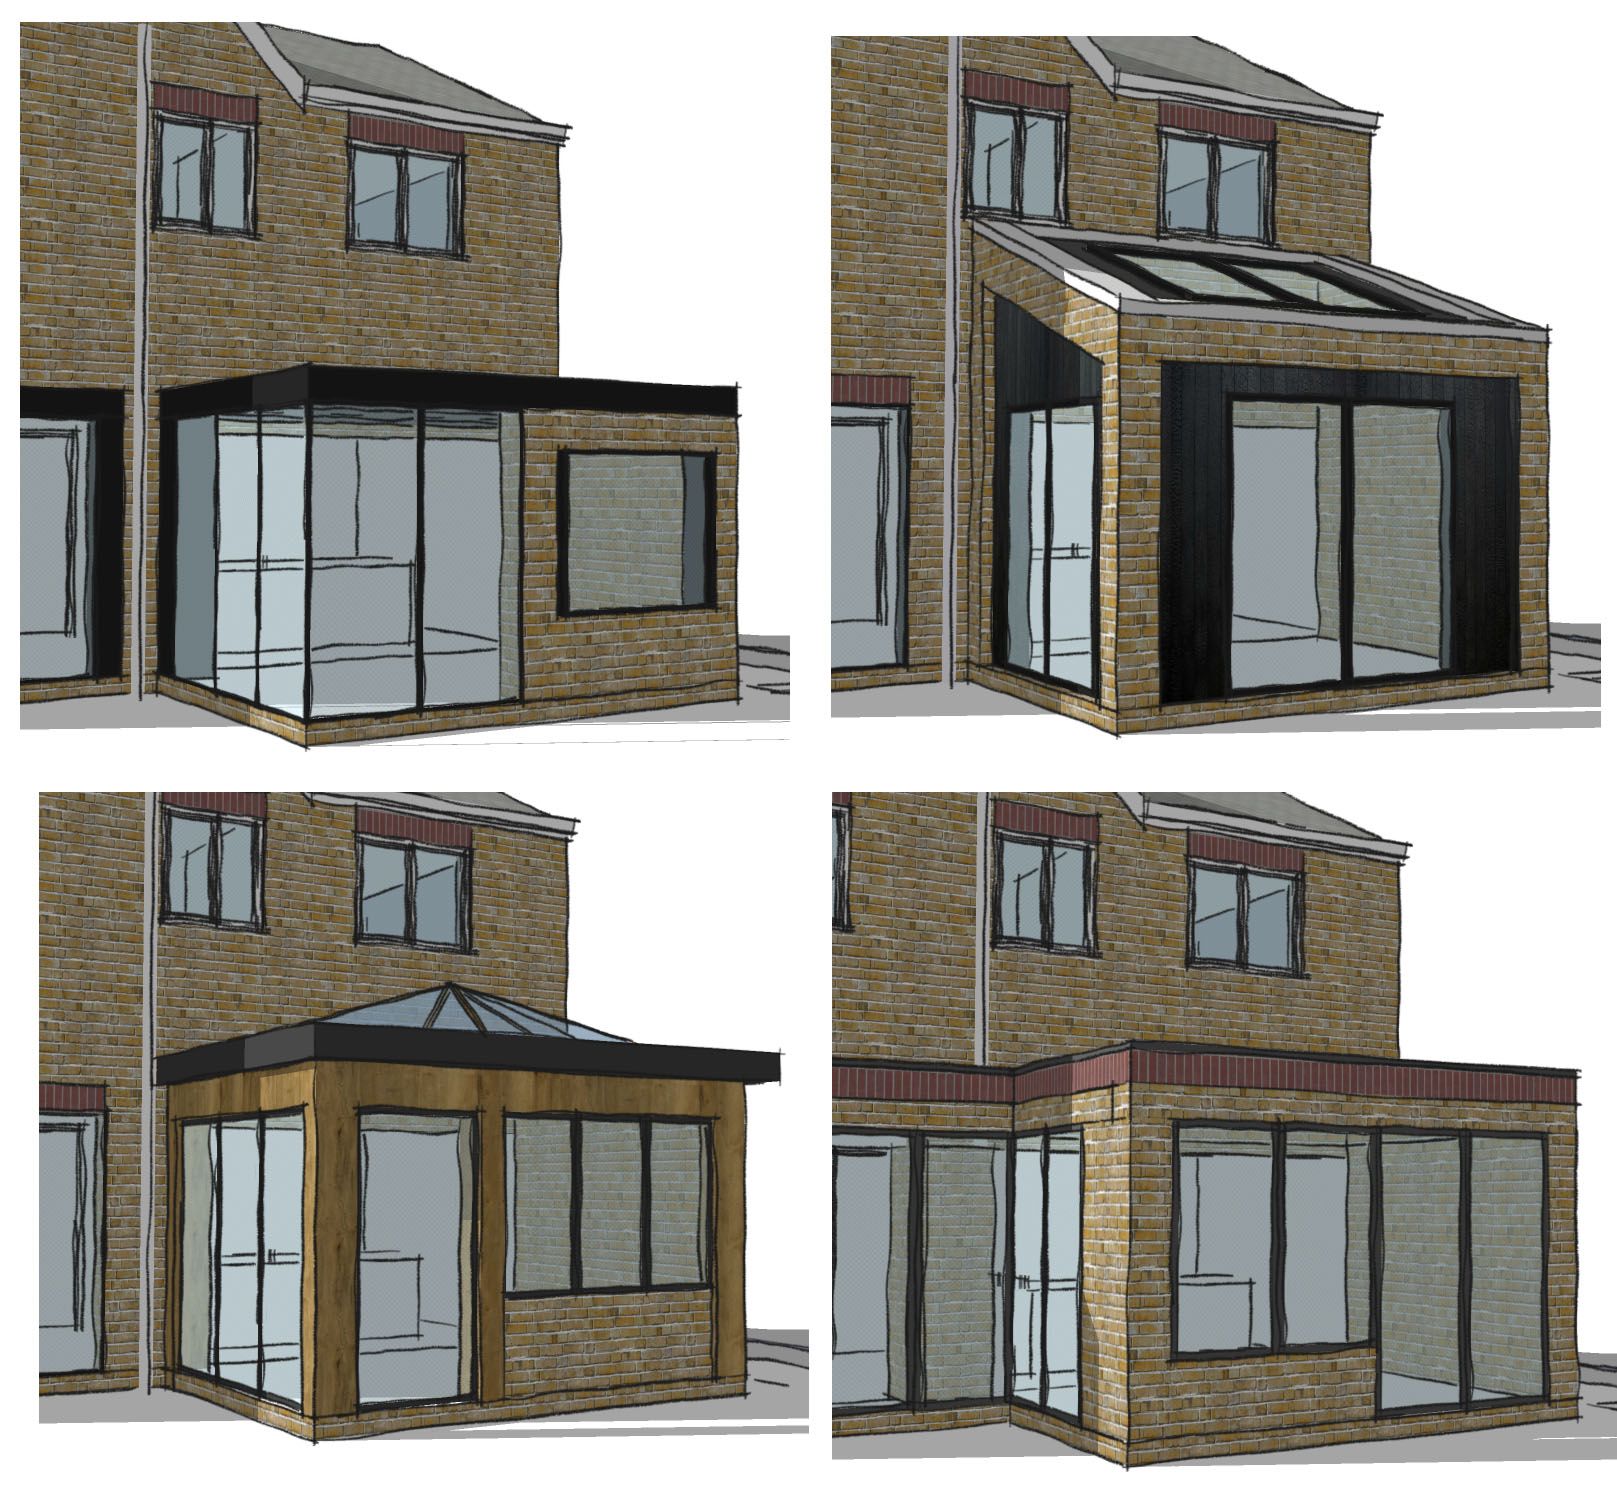 Test out your new extension ideas with some of our 3D studies